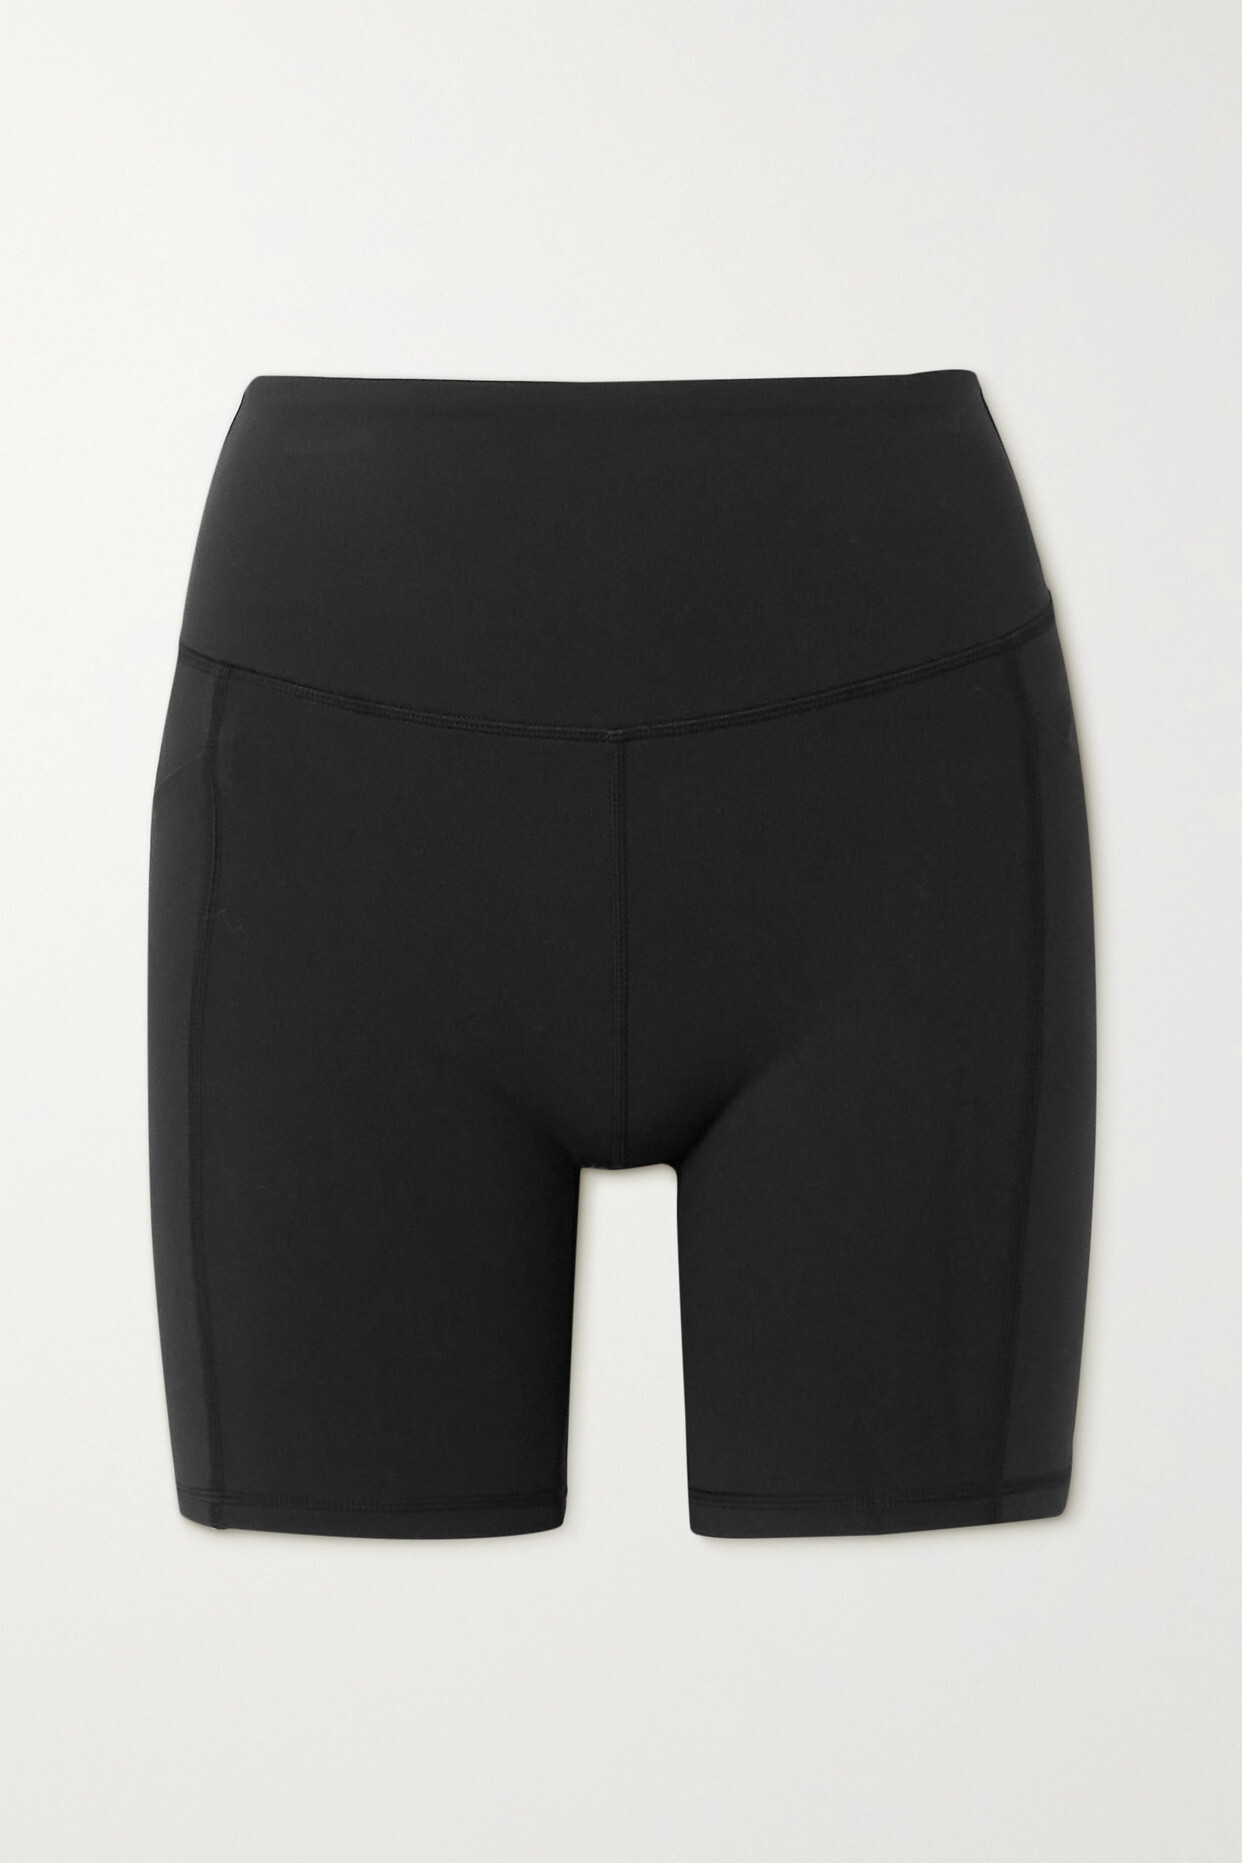 Varley - Let's Go Stretch-jersey Cycling Shorts - Black